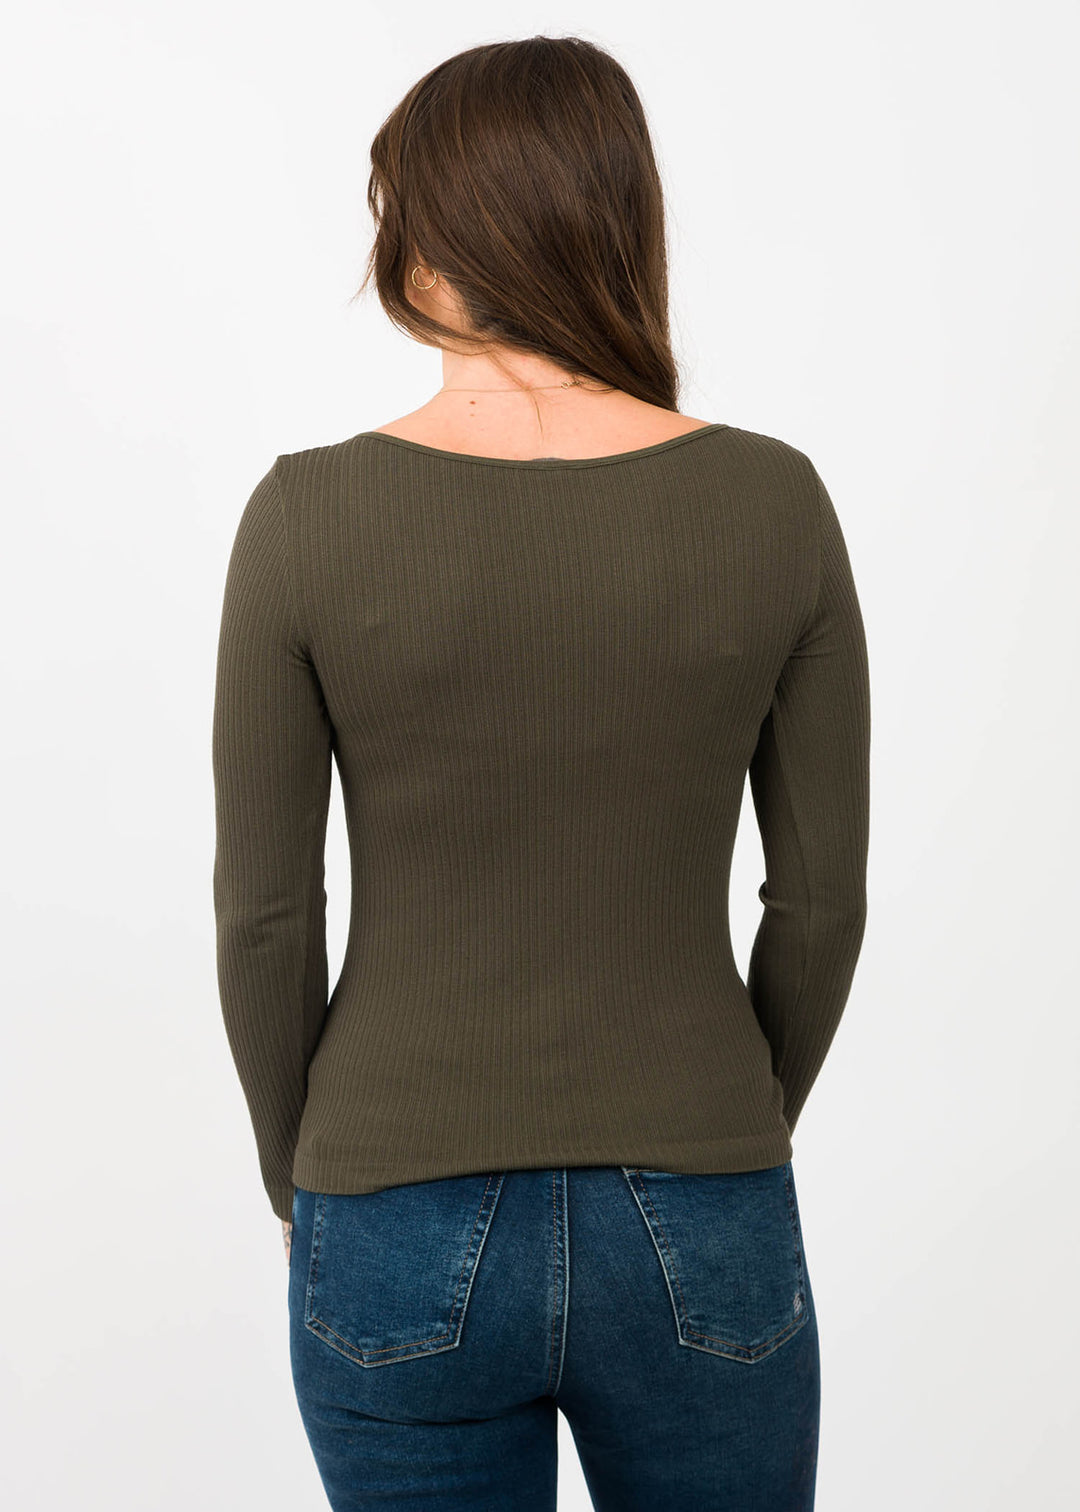 C'est Moi Bamboo Rib Round Top (Olive)